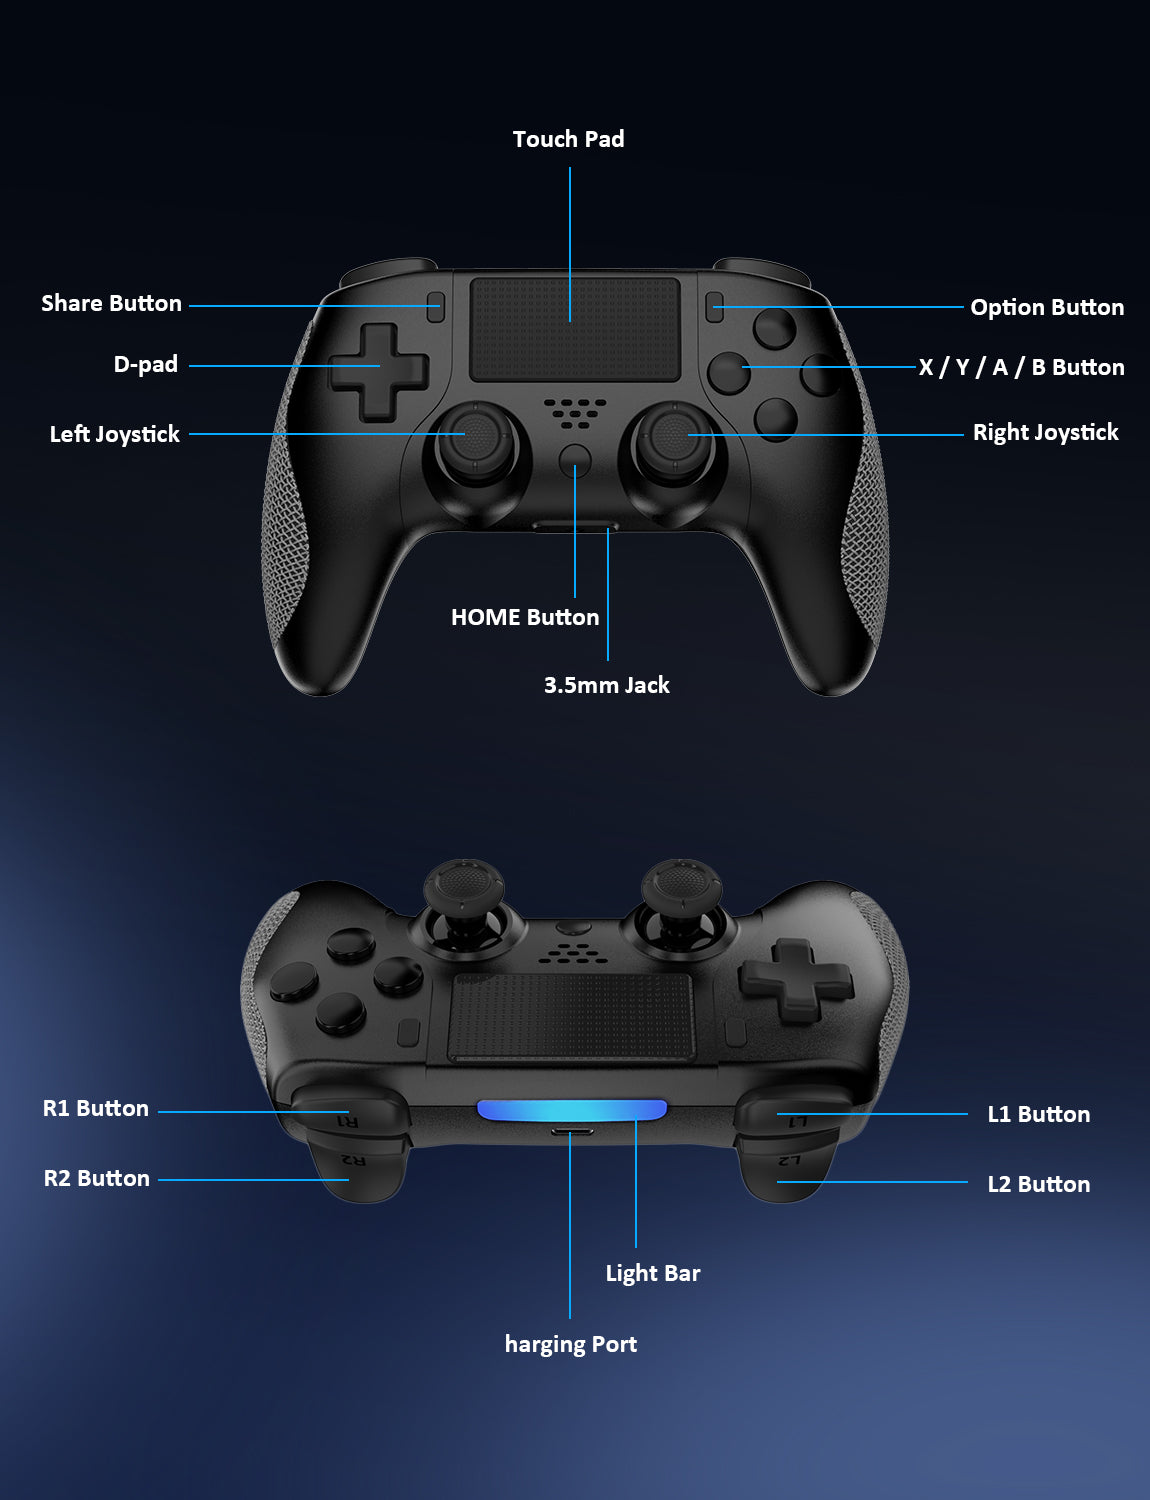 The controller has a touchpad, D-pad, joysticks, X/Y/A/B, R1/R2/L1/L2, Share button, and more.